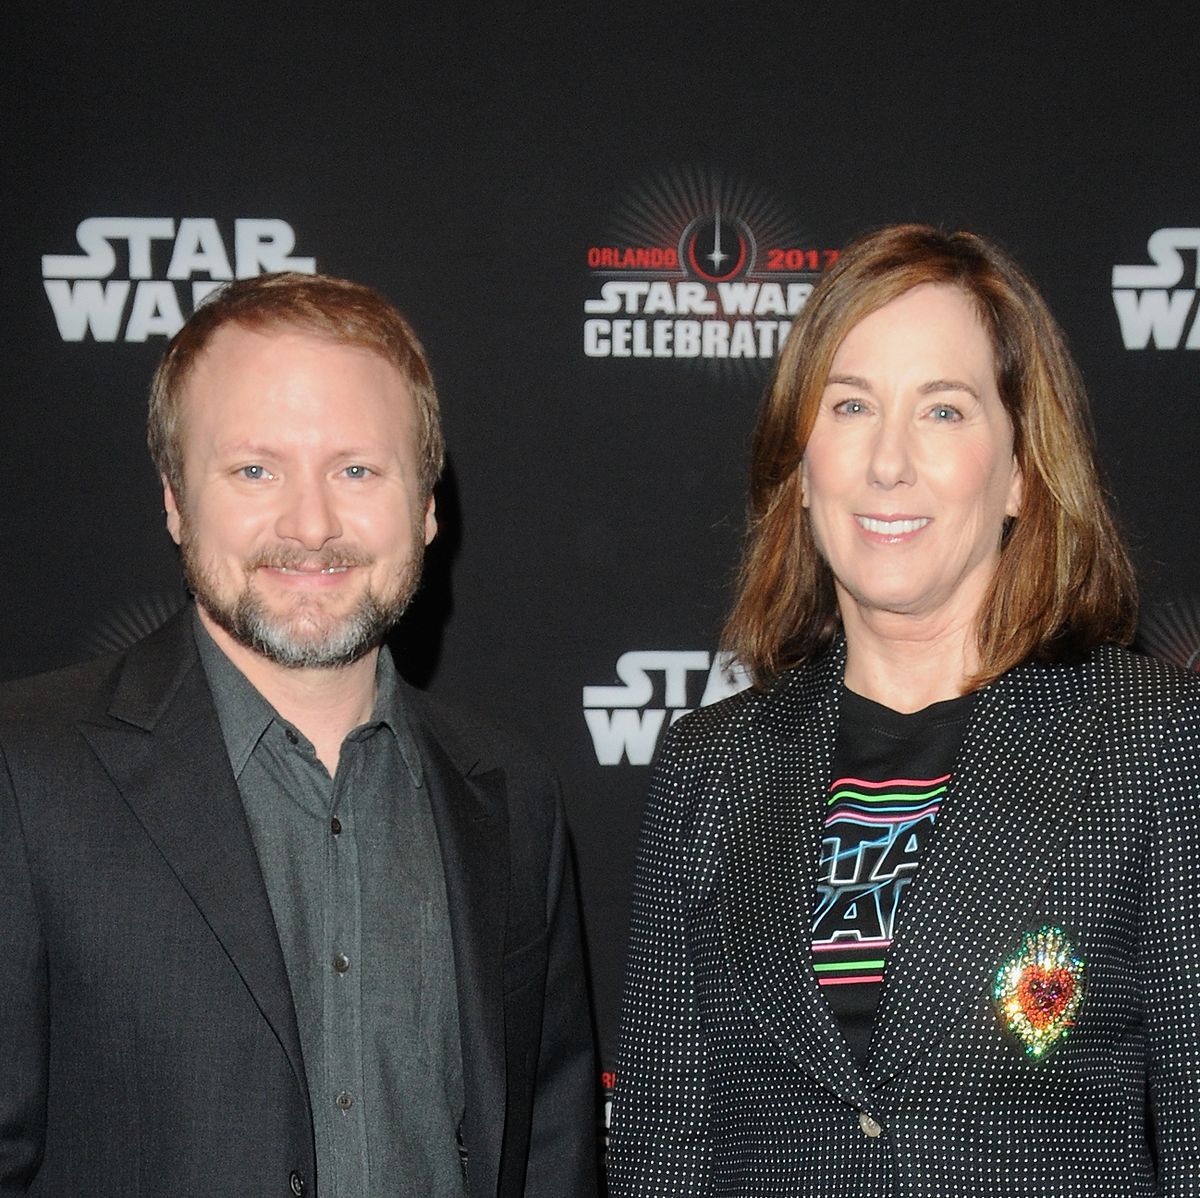 Rian Johnson would be sad if he can't make Star Wars trilogy